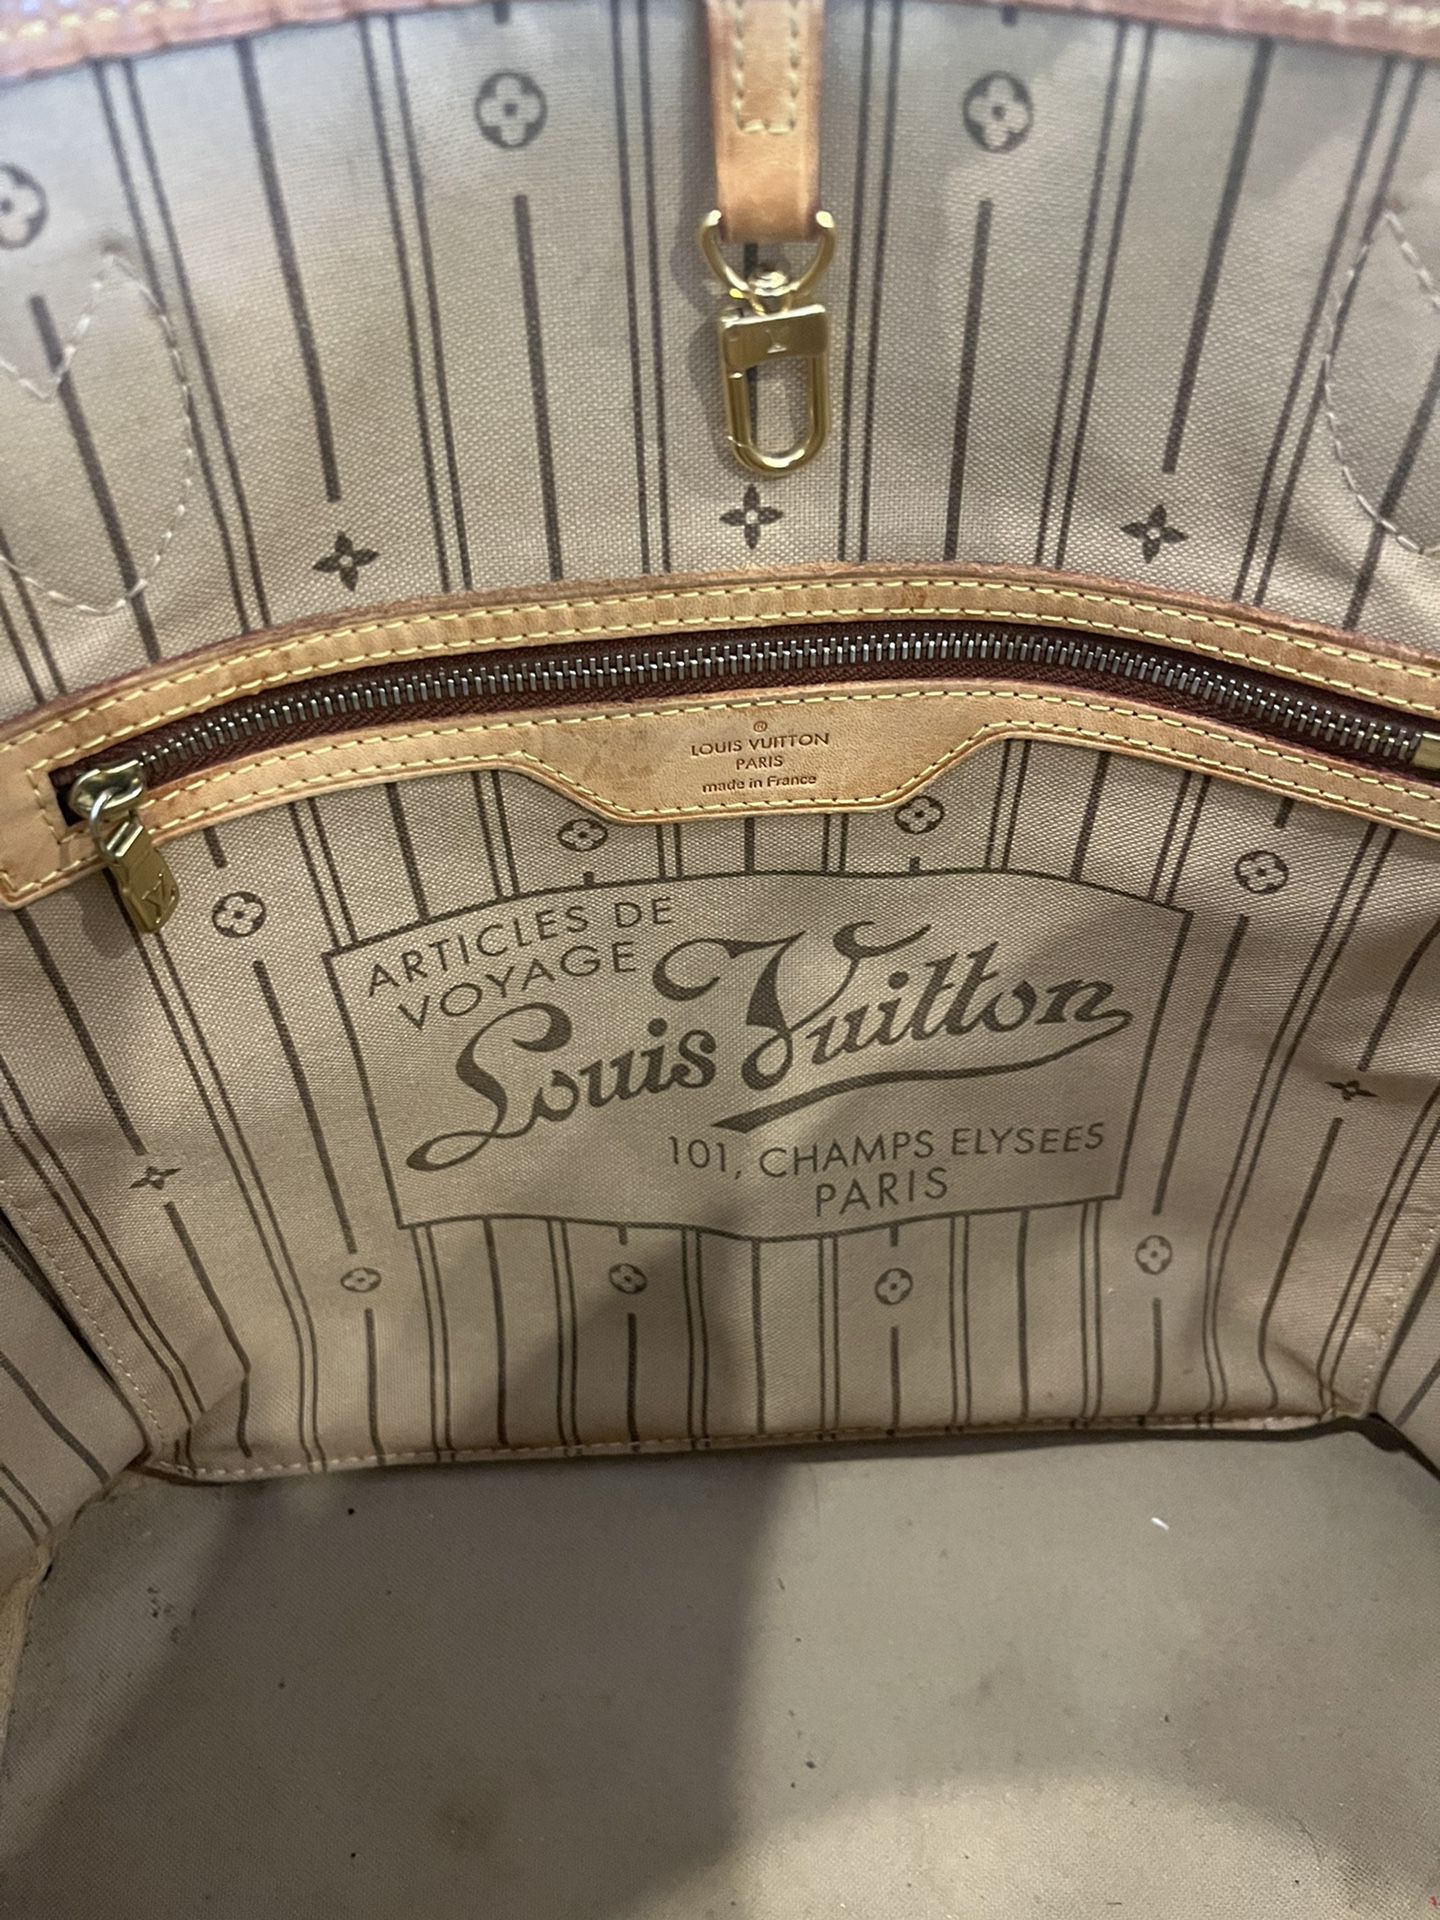 Authentic Louis Vuitton Neverfull MM for Sale in Scottsdale, AZ